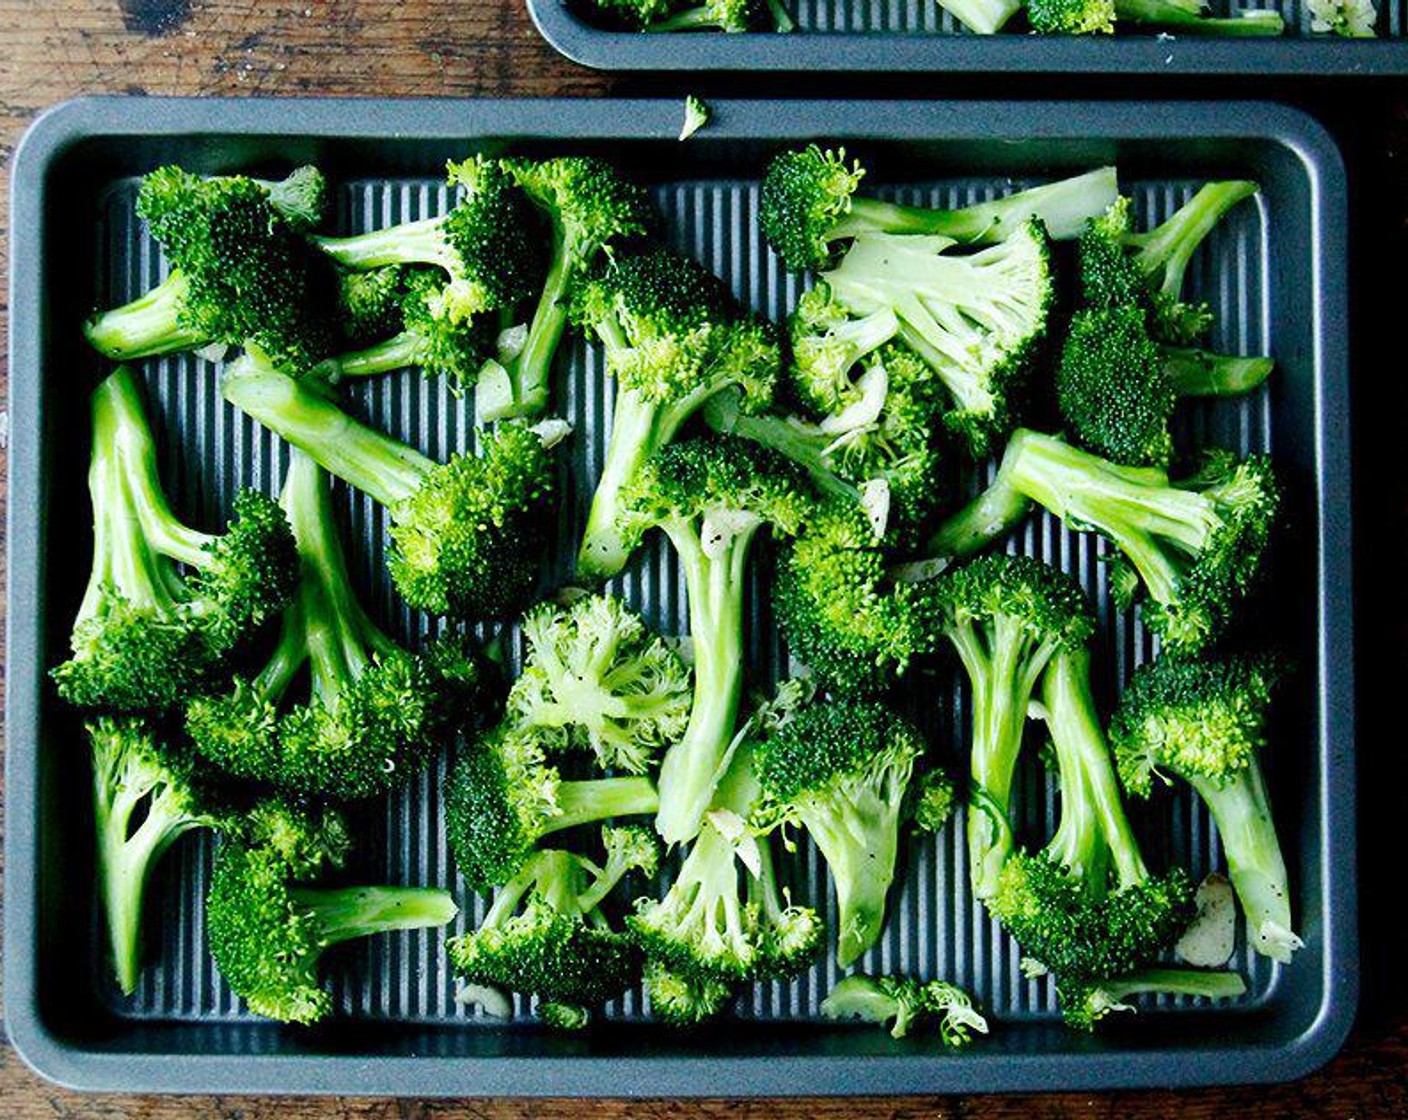 step 3 In a bowl toss the Garlic (2 cloves) with the broccoli and drizzle with 3 tablespoons of Extra-Virgin Olive Oil (as needed). Sprinkle with Kosher Salt (to taste) and Freshly Ground Black Pepper (to taste). Toss to coat evenly. Spread the broccoli in a single layer on a roasting tray.